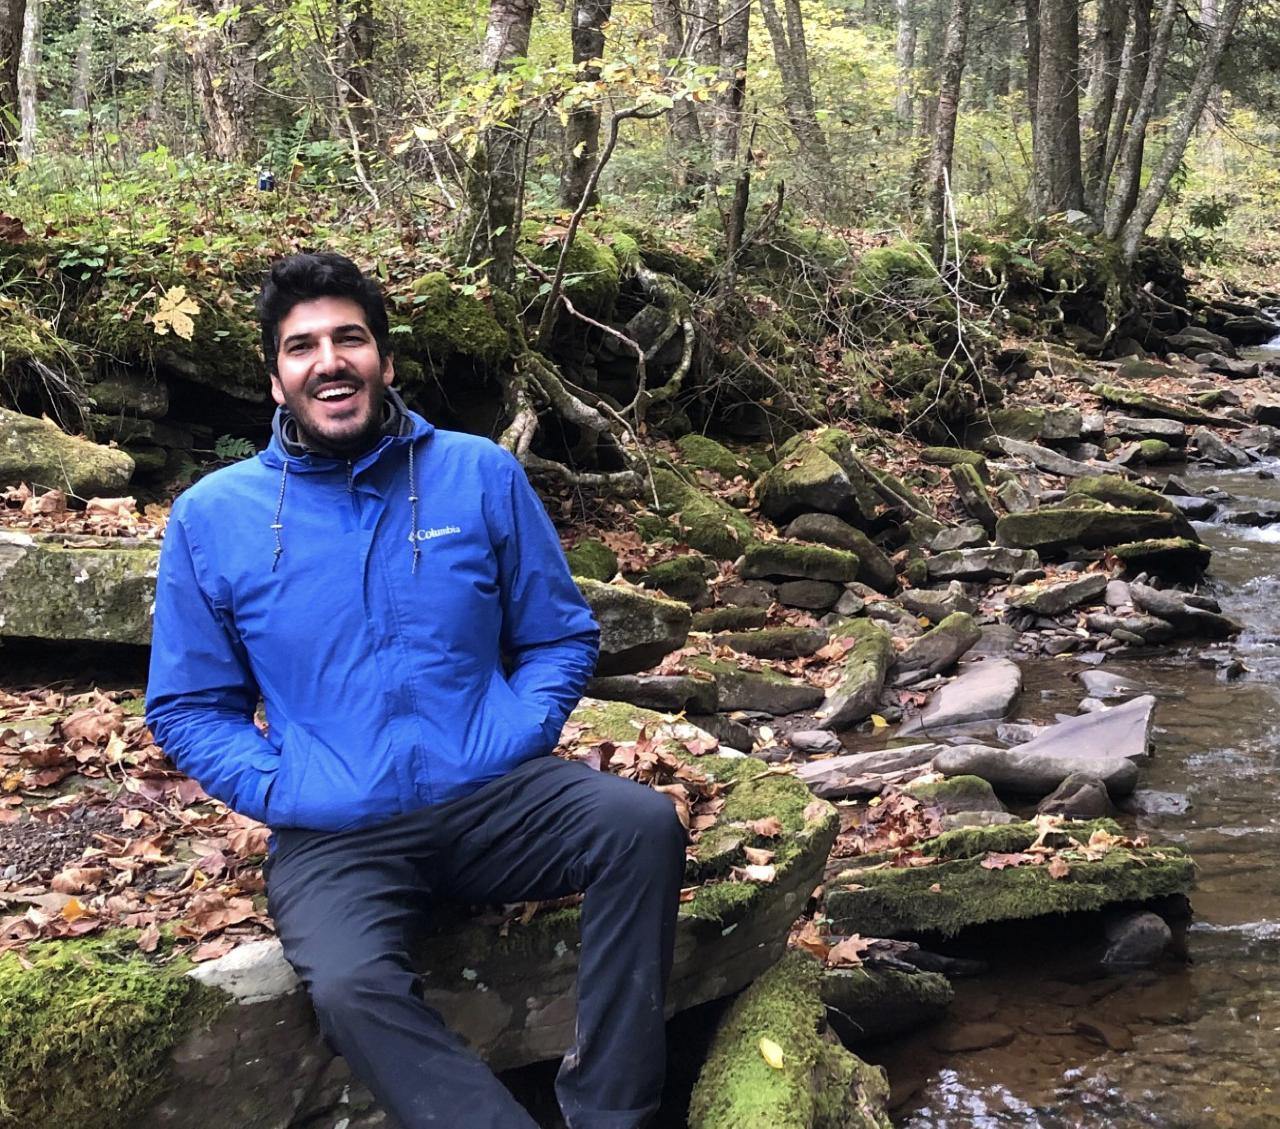 Emrah on rock in the woods near a stream.